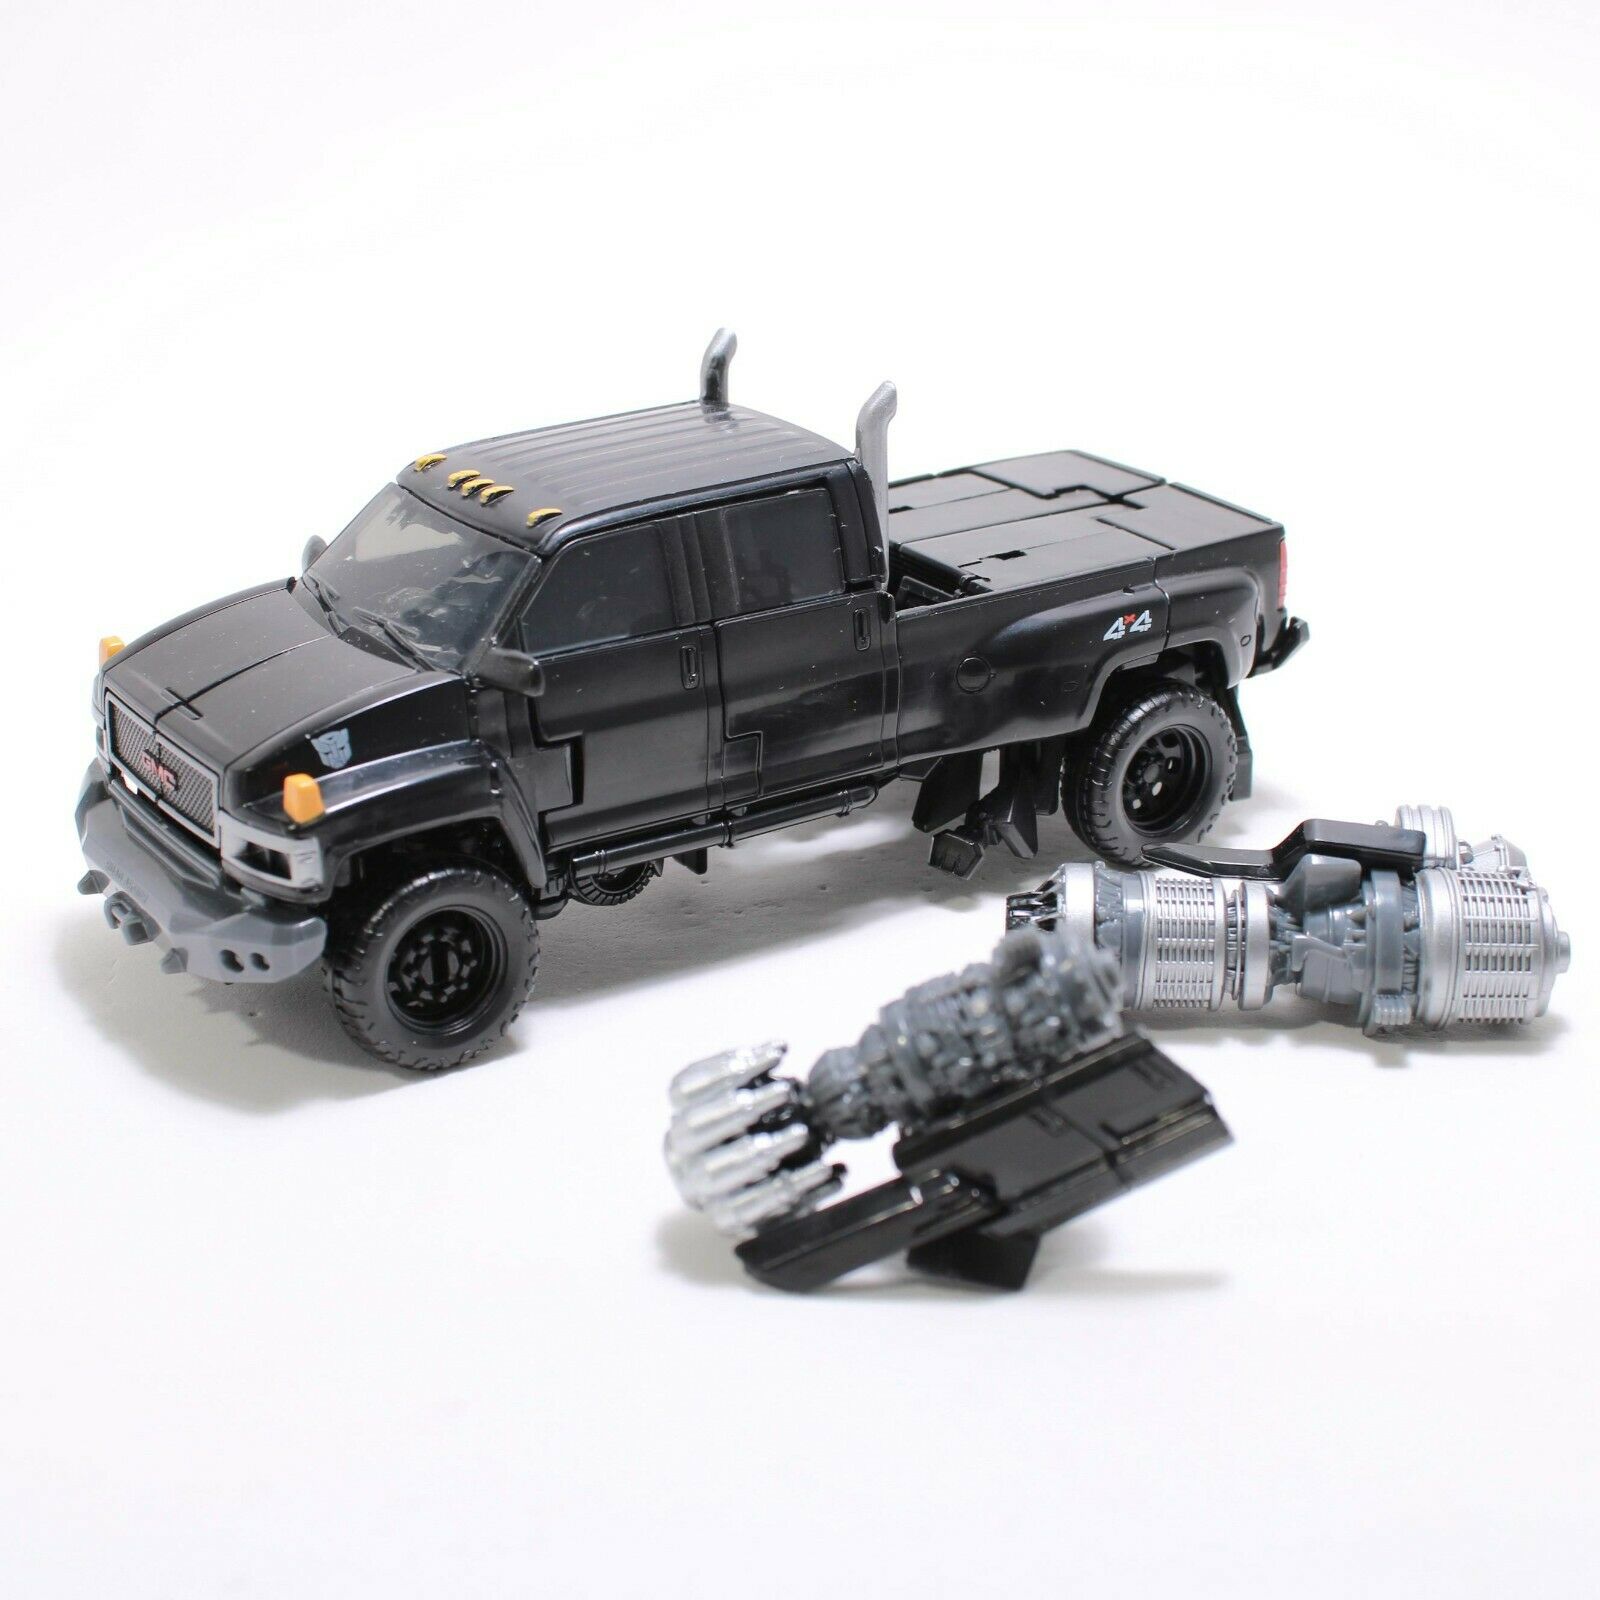 Transformers Studio Series 14 Ironhide - SS14 Voyager Class Figure Complete